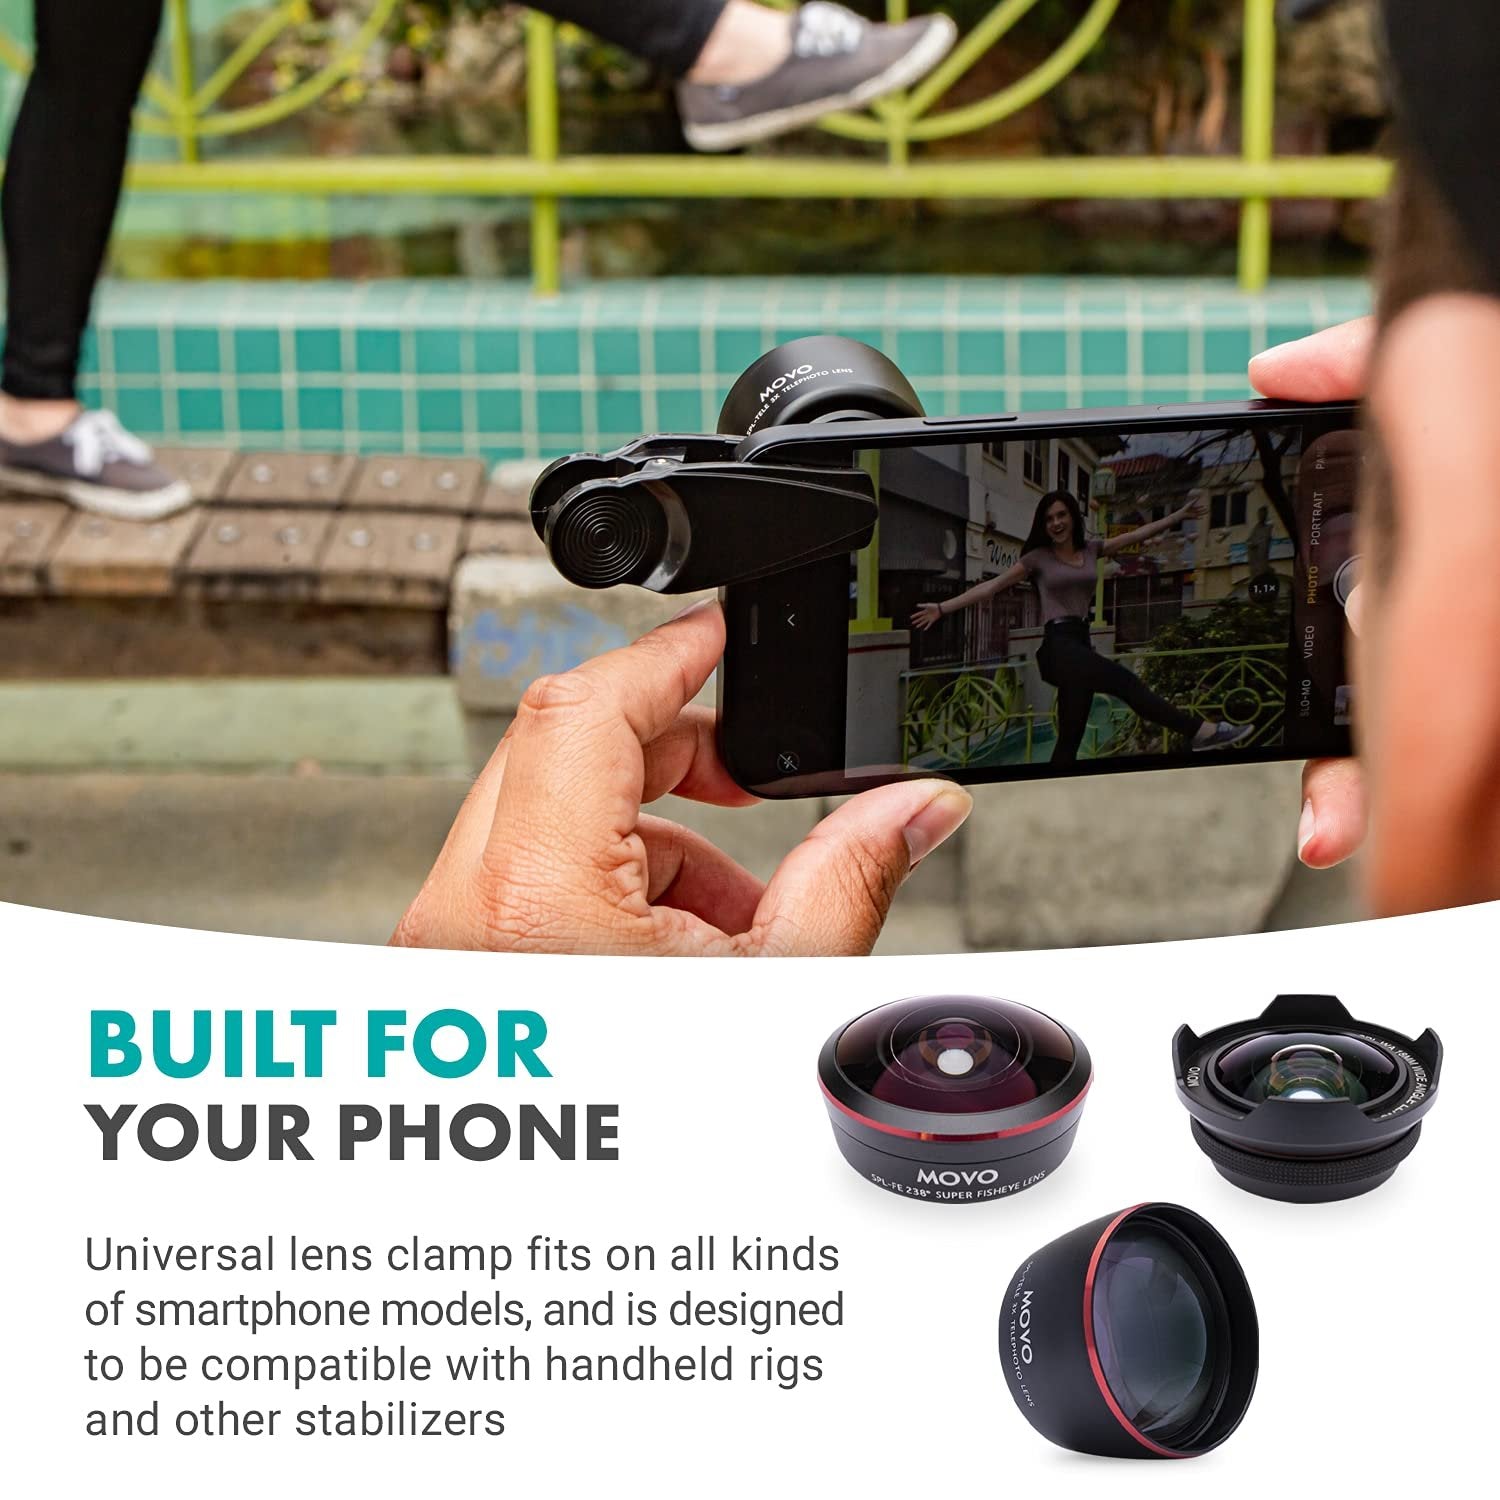 Movo Smartphone Camera Lens Kit - Wide Angle, Telephoto, Fisheye Phone Camera Lens Attachments & Case for iPhone and Android Phone - Photography Accessories for Cell Phone Camera Effects, Zoom, Macro